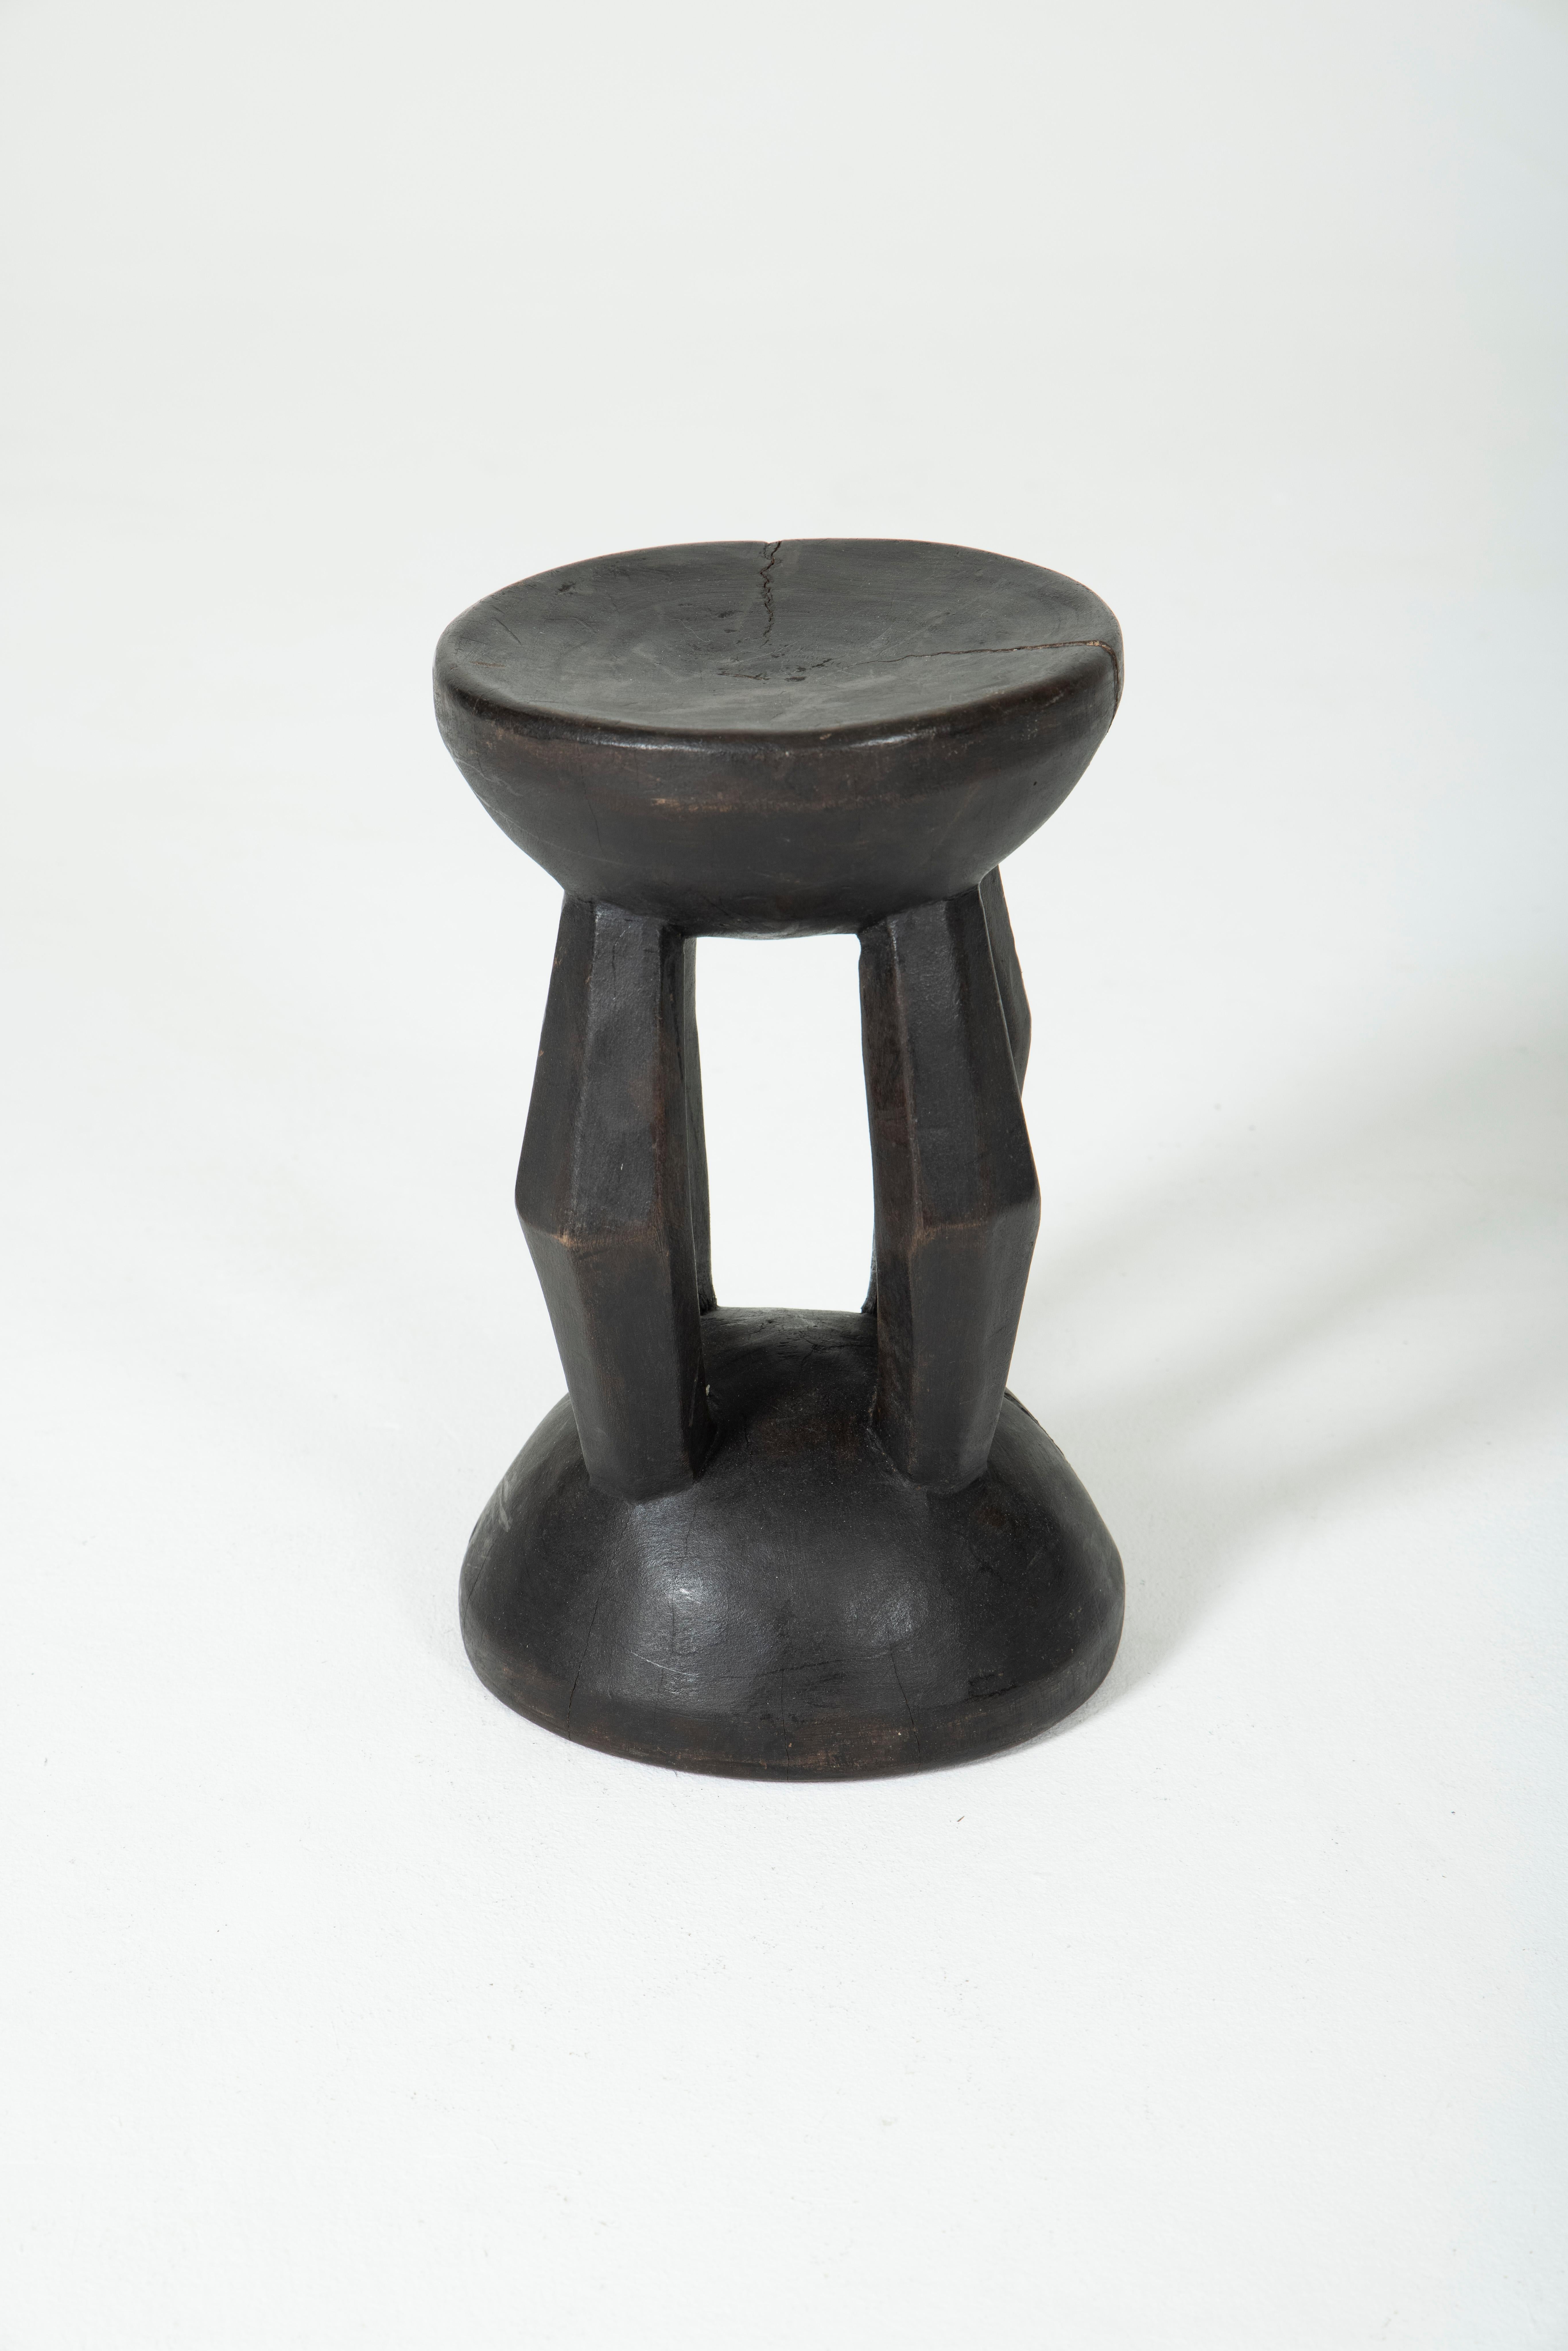 Tribal Stool or Side Table Dogon